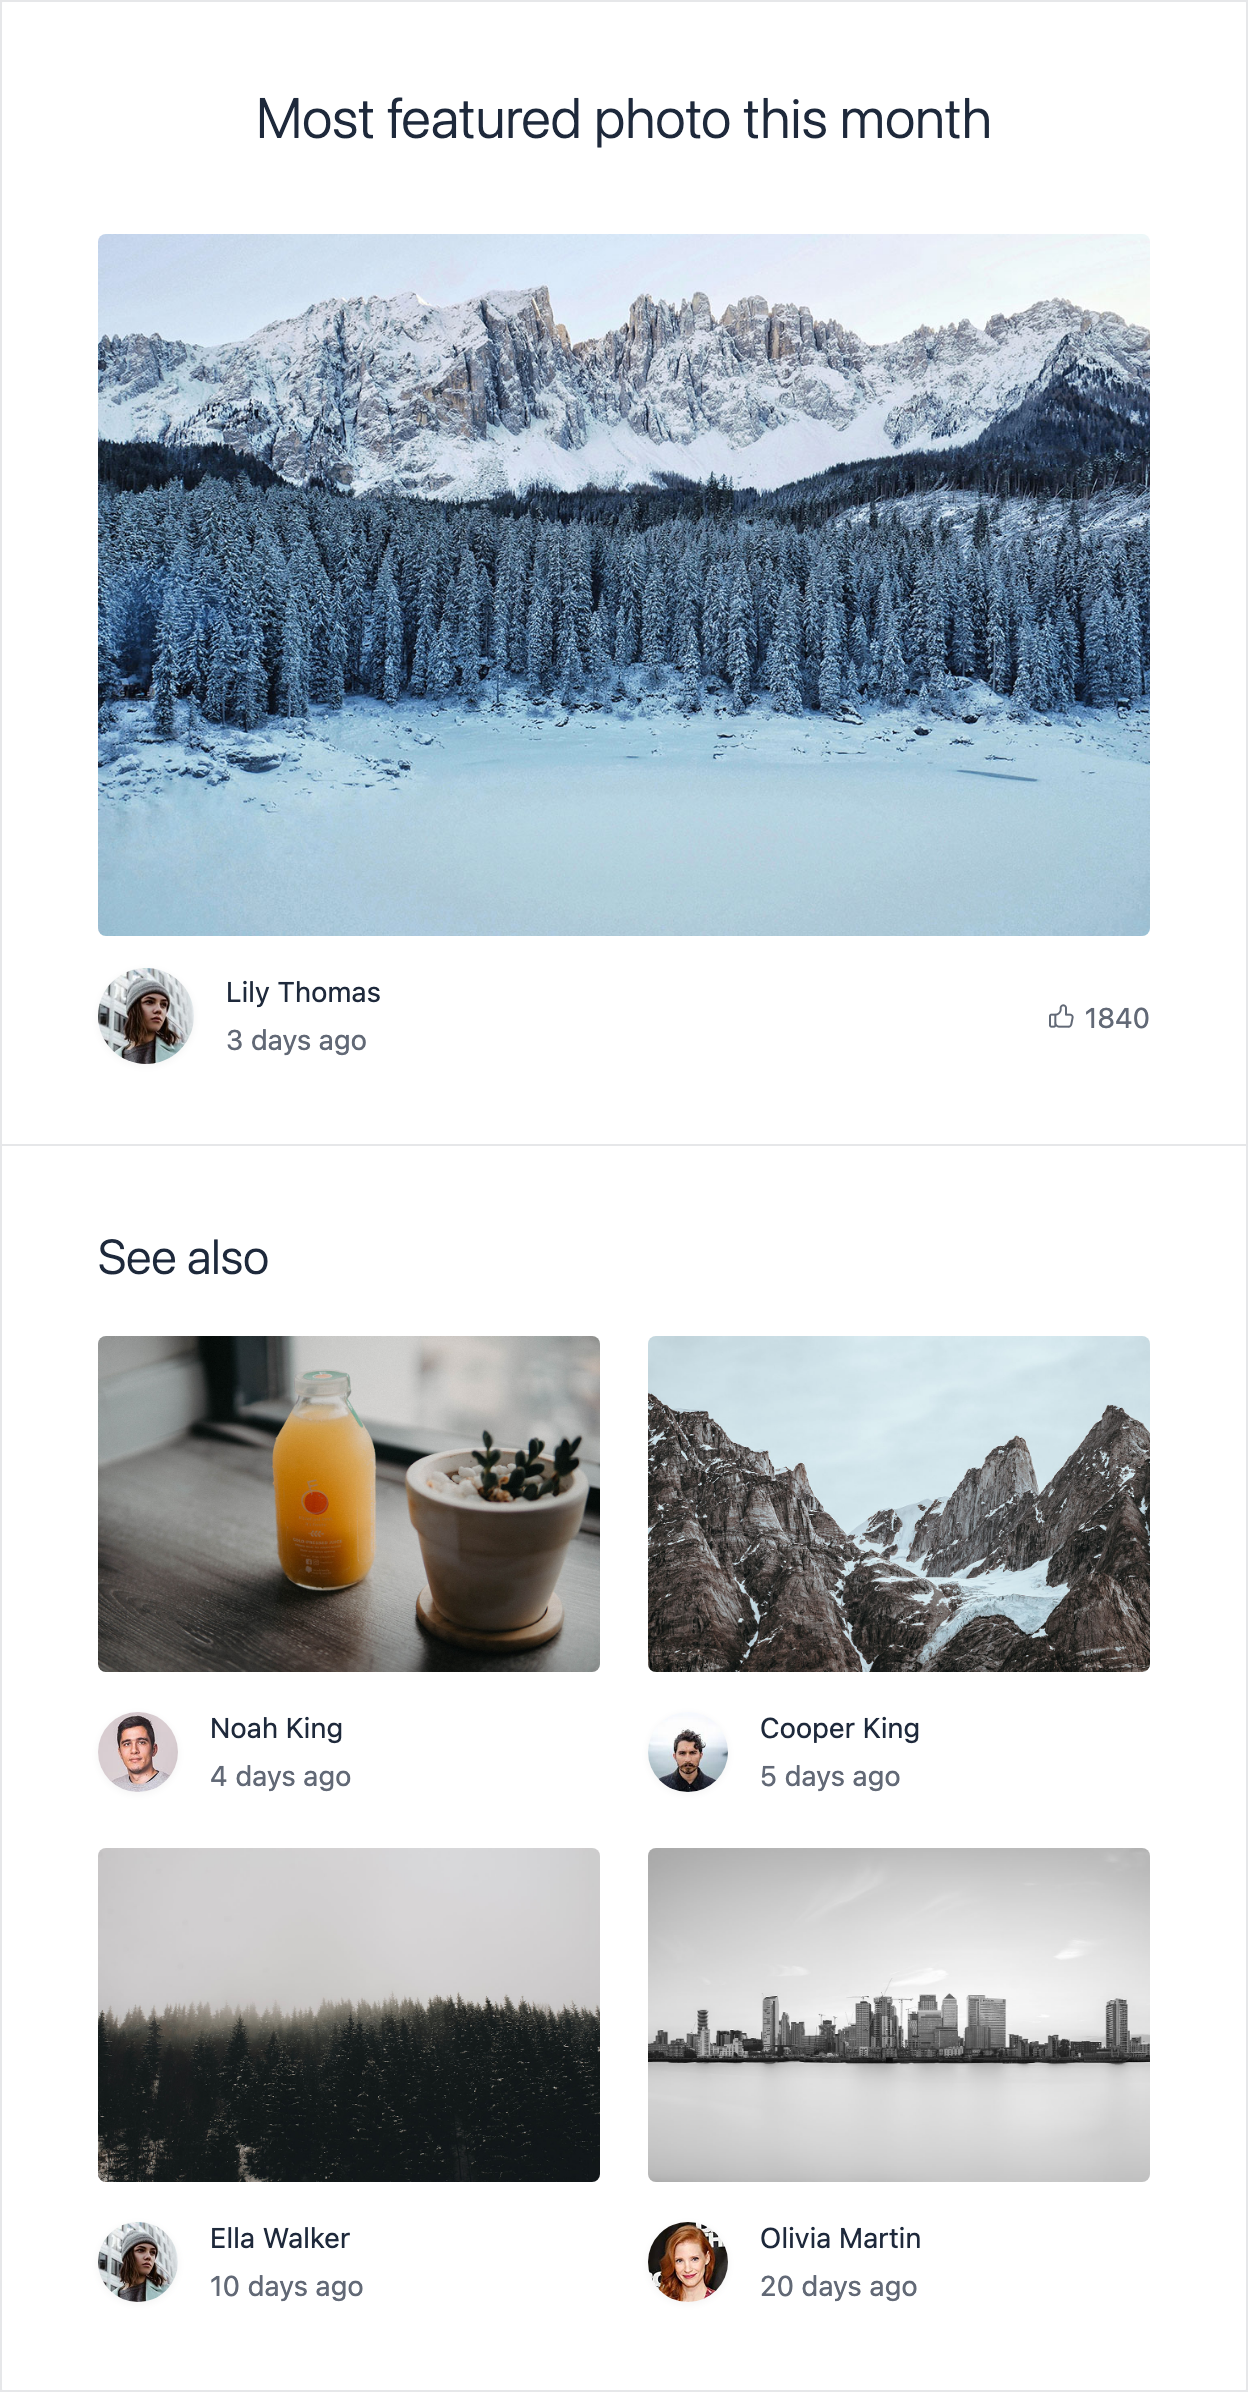 Email template with the featured photo